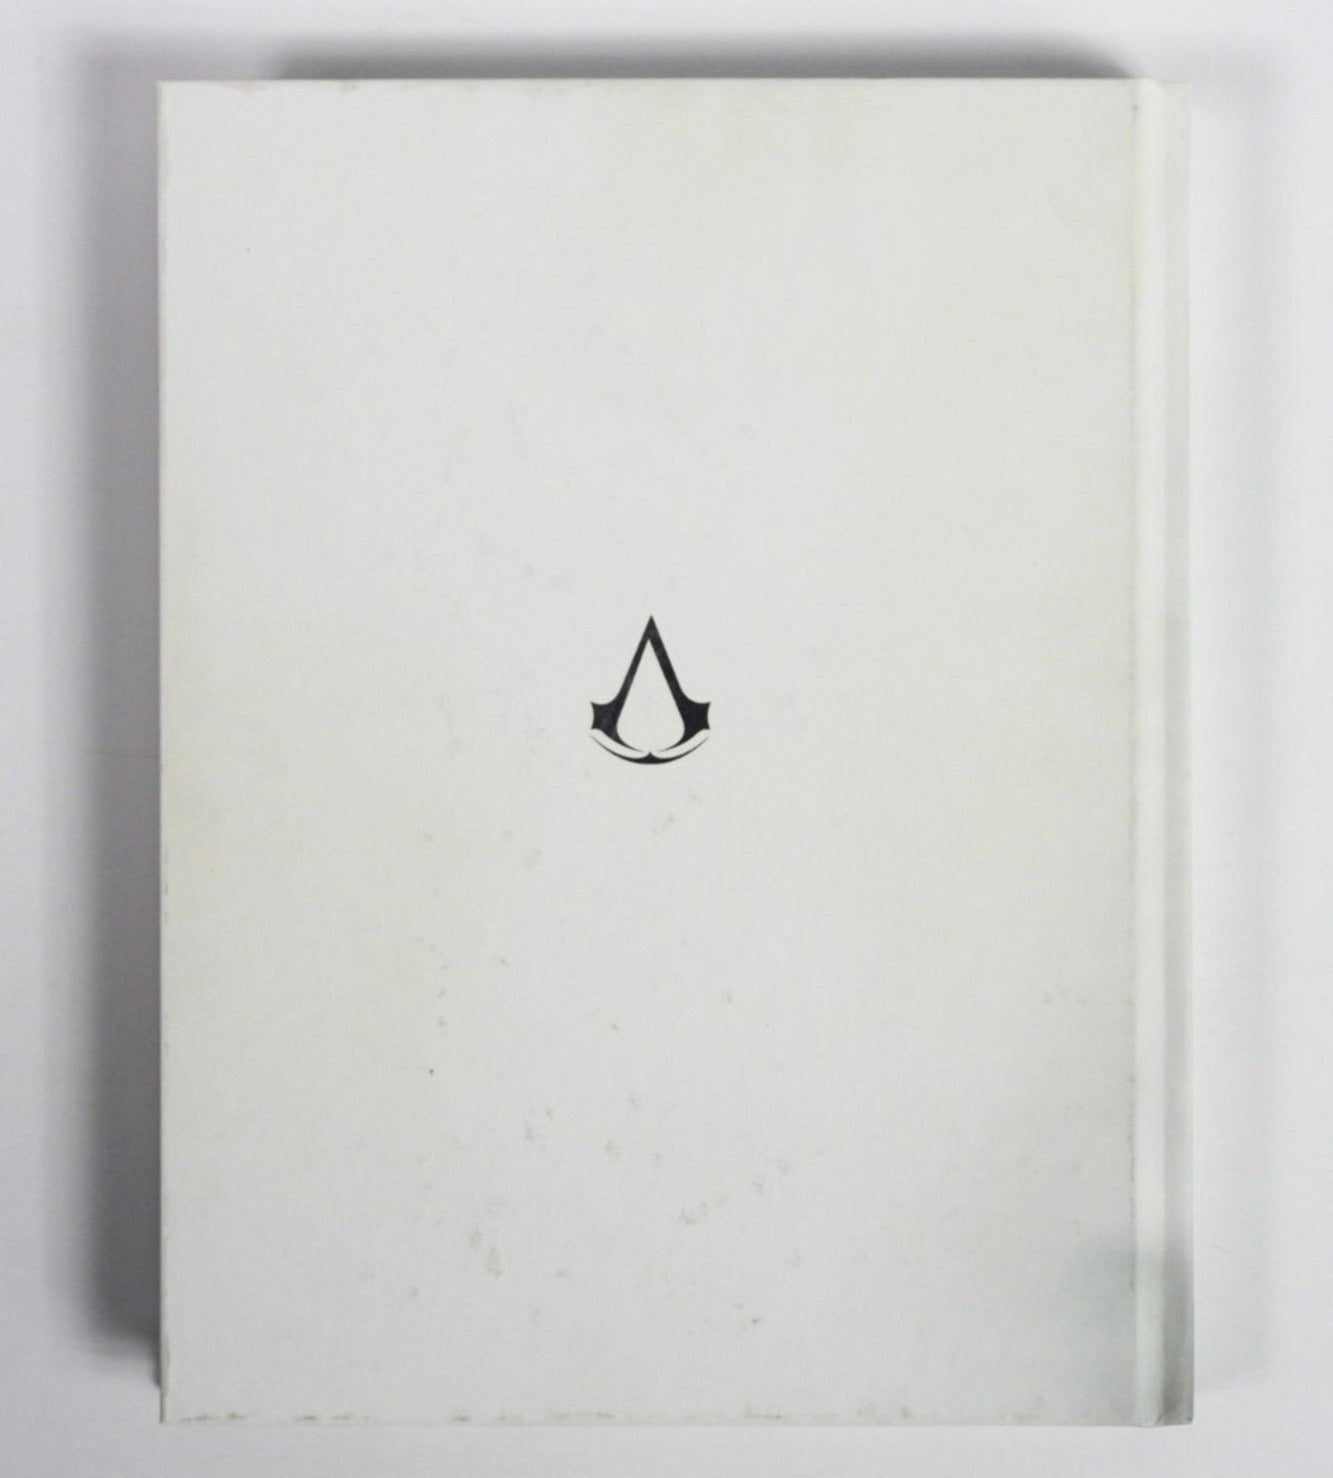 File:Assassin's Creed II The Complete Official Guide Collector's